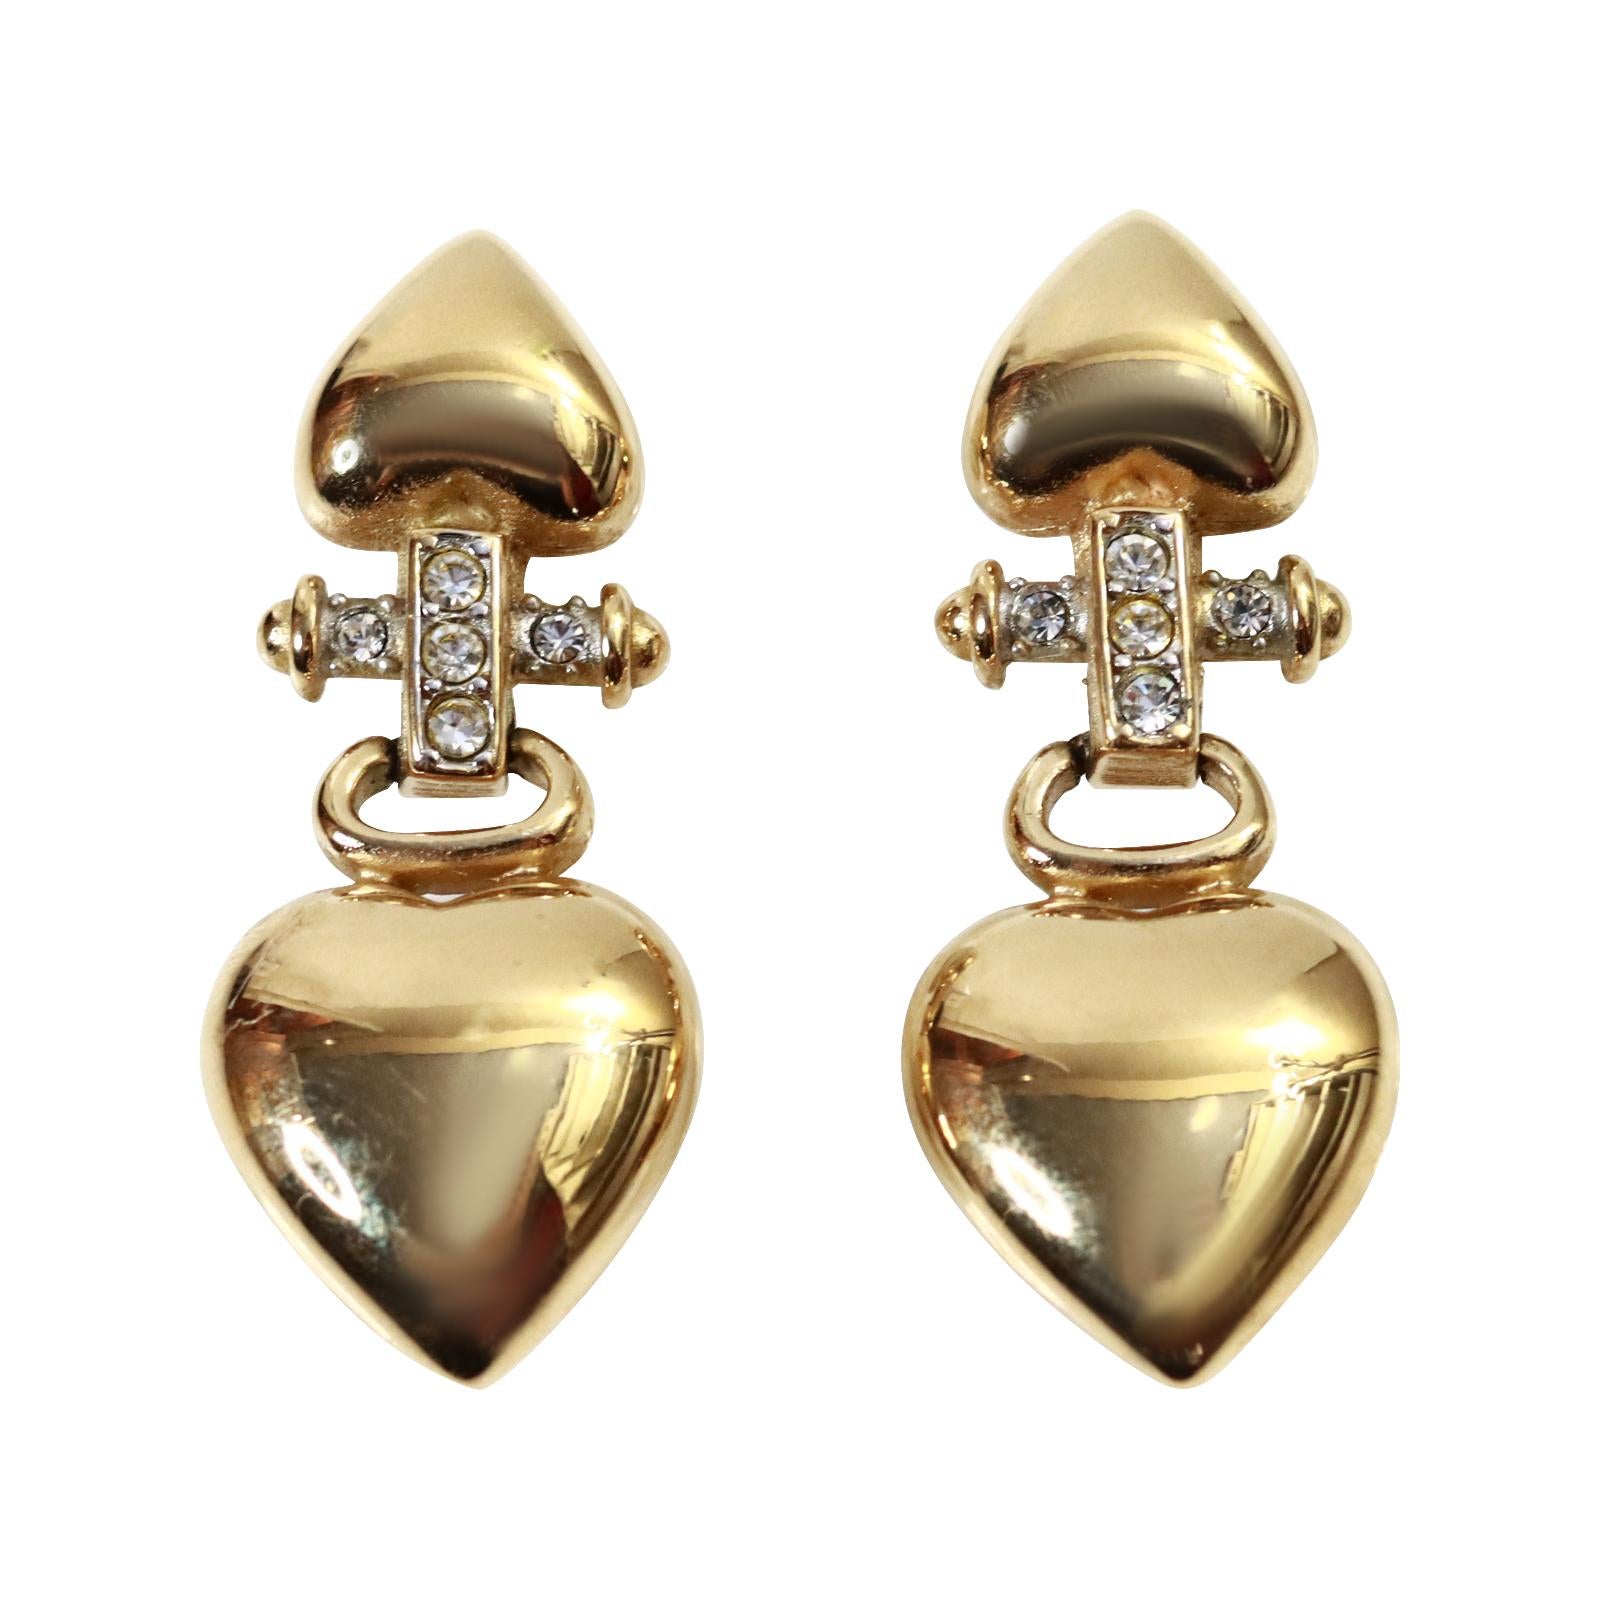 Vintage Givenchy Gold Tone Drop Heart Earrings Circa 1990s.  A great pair of easy and functional and stylish and chic earrings. Well made with two hearts that ascend in Size with crystals in the middle.

Pierced.

